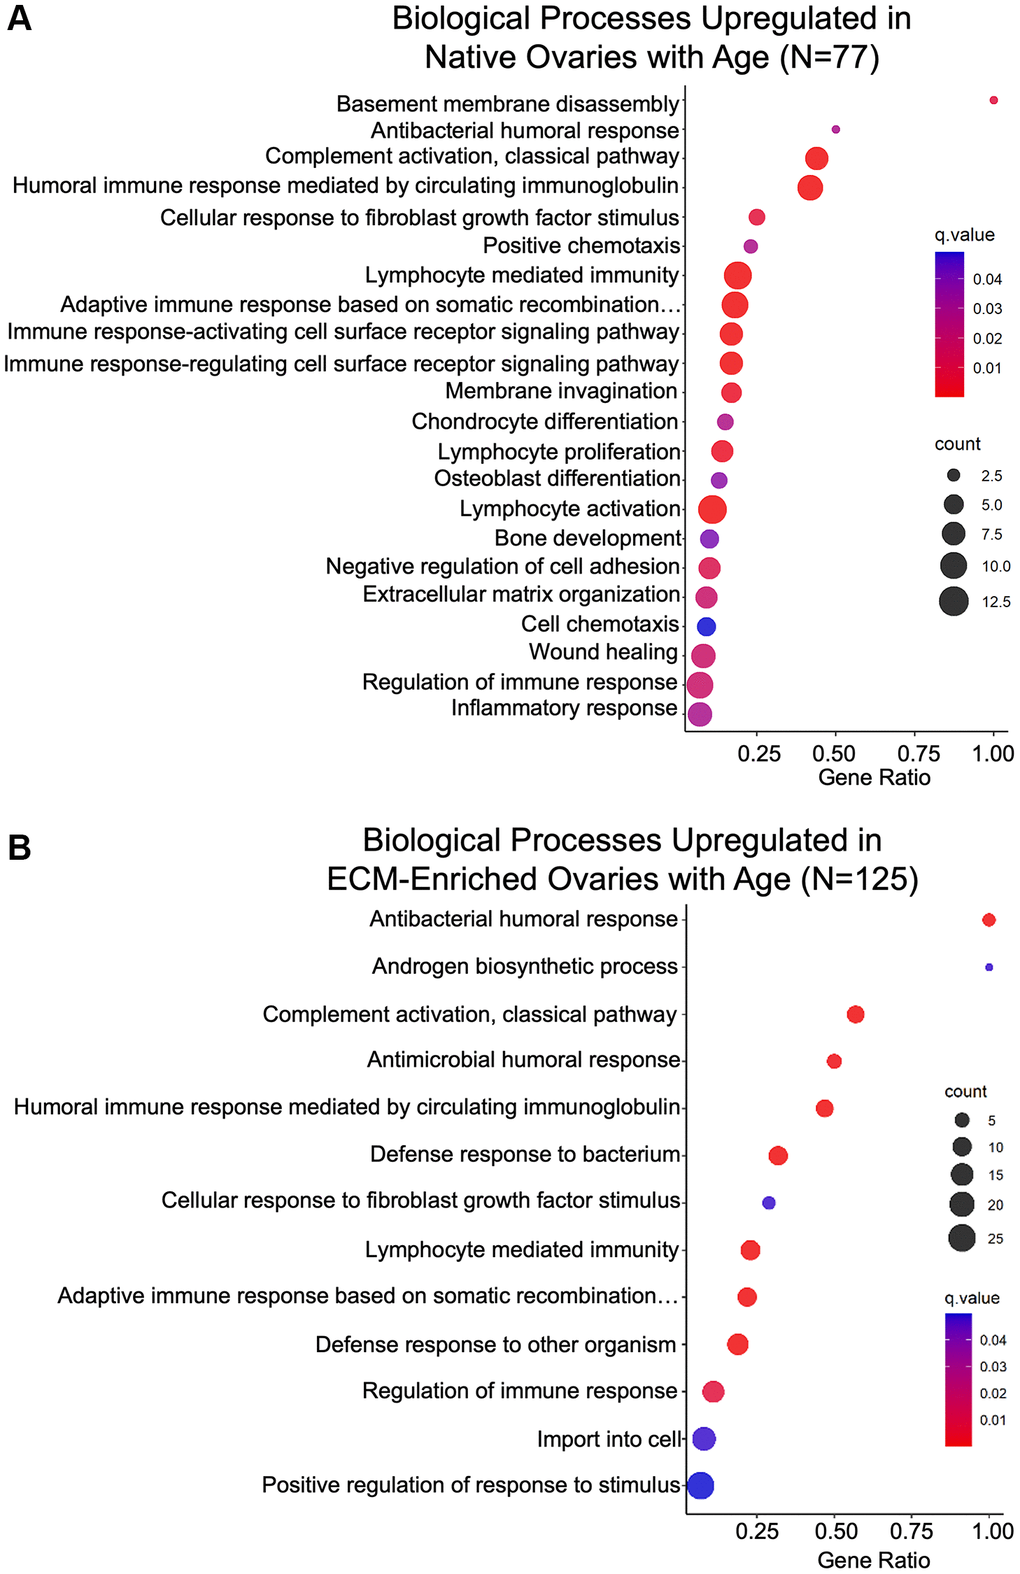 Biological processes associated with inflammation and ECM organization are upregulated in the ovary with age. GO analysis of proteins significantly upregulated with age from (A) native and (B) ECM-enriched ovaries was performed using consensus pathway database (CPDB) at level 4, q-value 